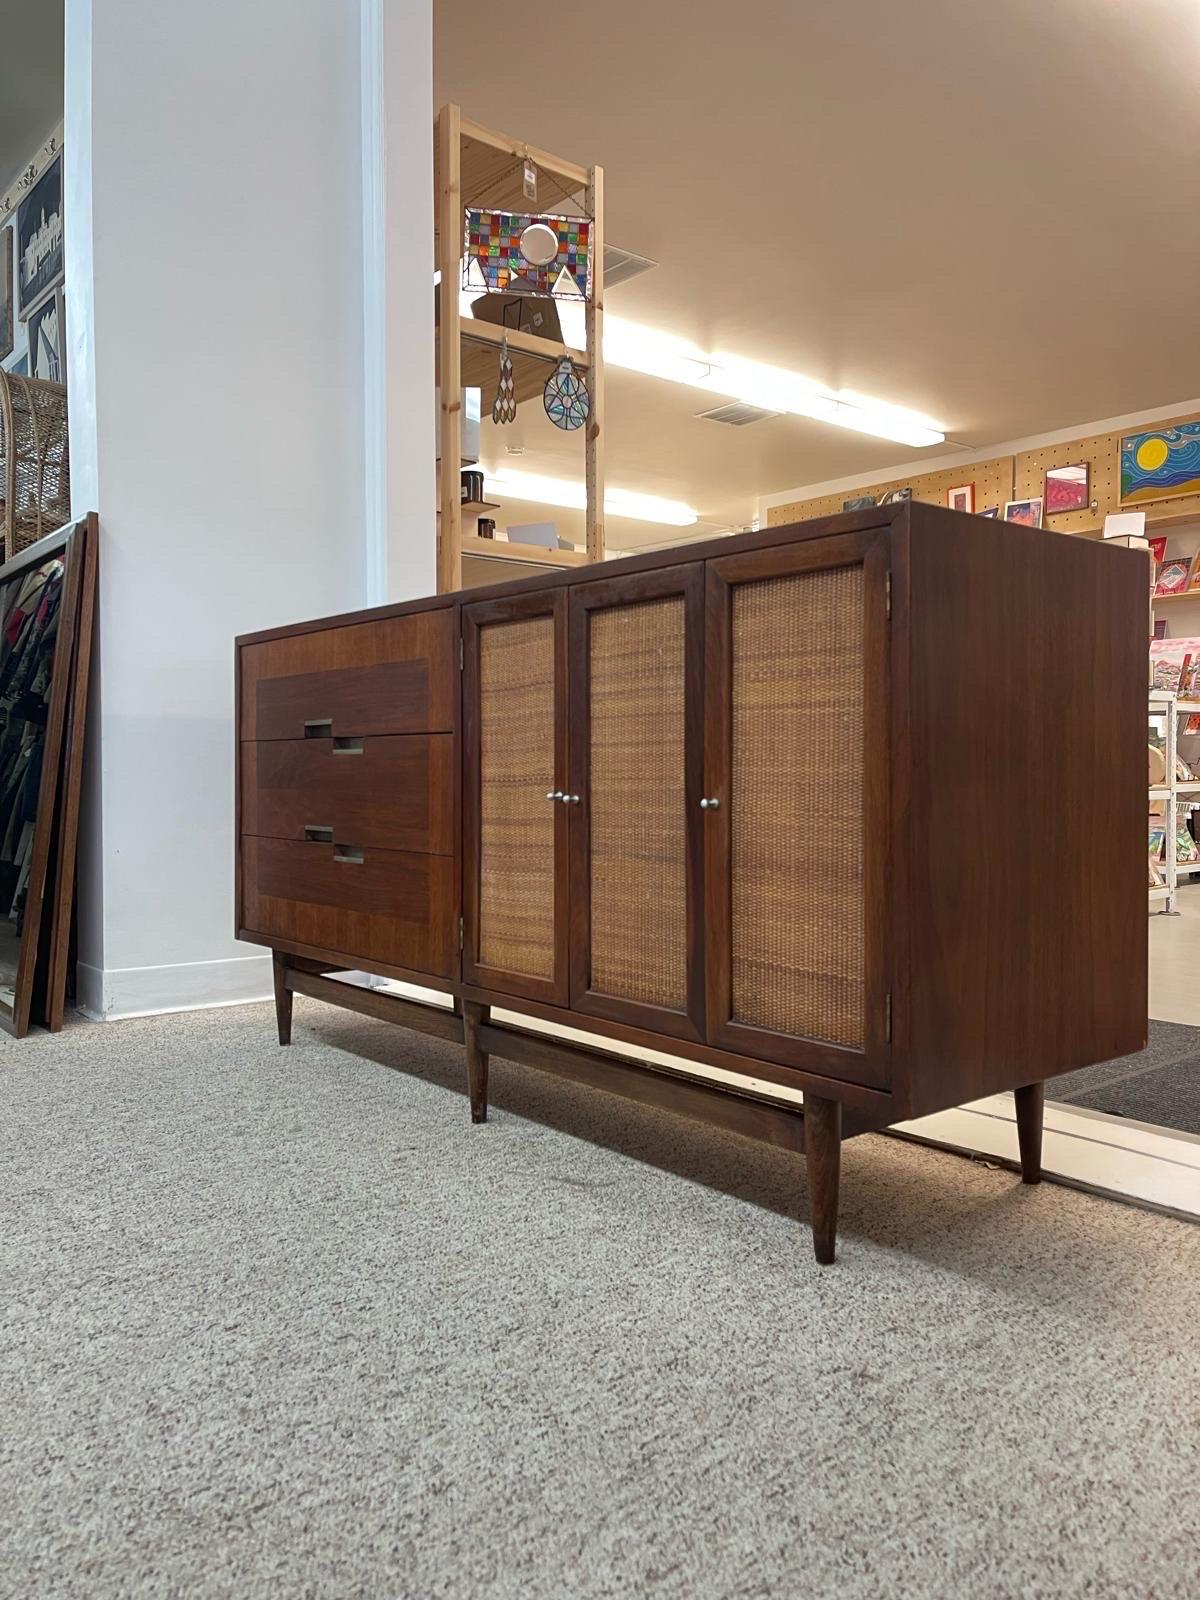 This Dresser has 3 Drawers with Silver Toned Handles and Beautiful wood Inlay Features. Next to this, there are Cane Accented Doors Opening to Cabinet Space as well as Three Additional Drawers as Shown. Walnut Toned Wood. The Top of this Drawer has